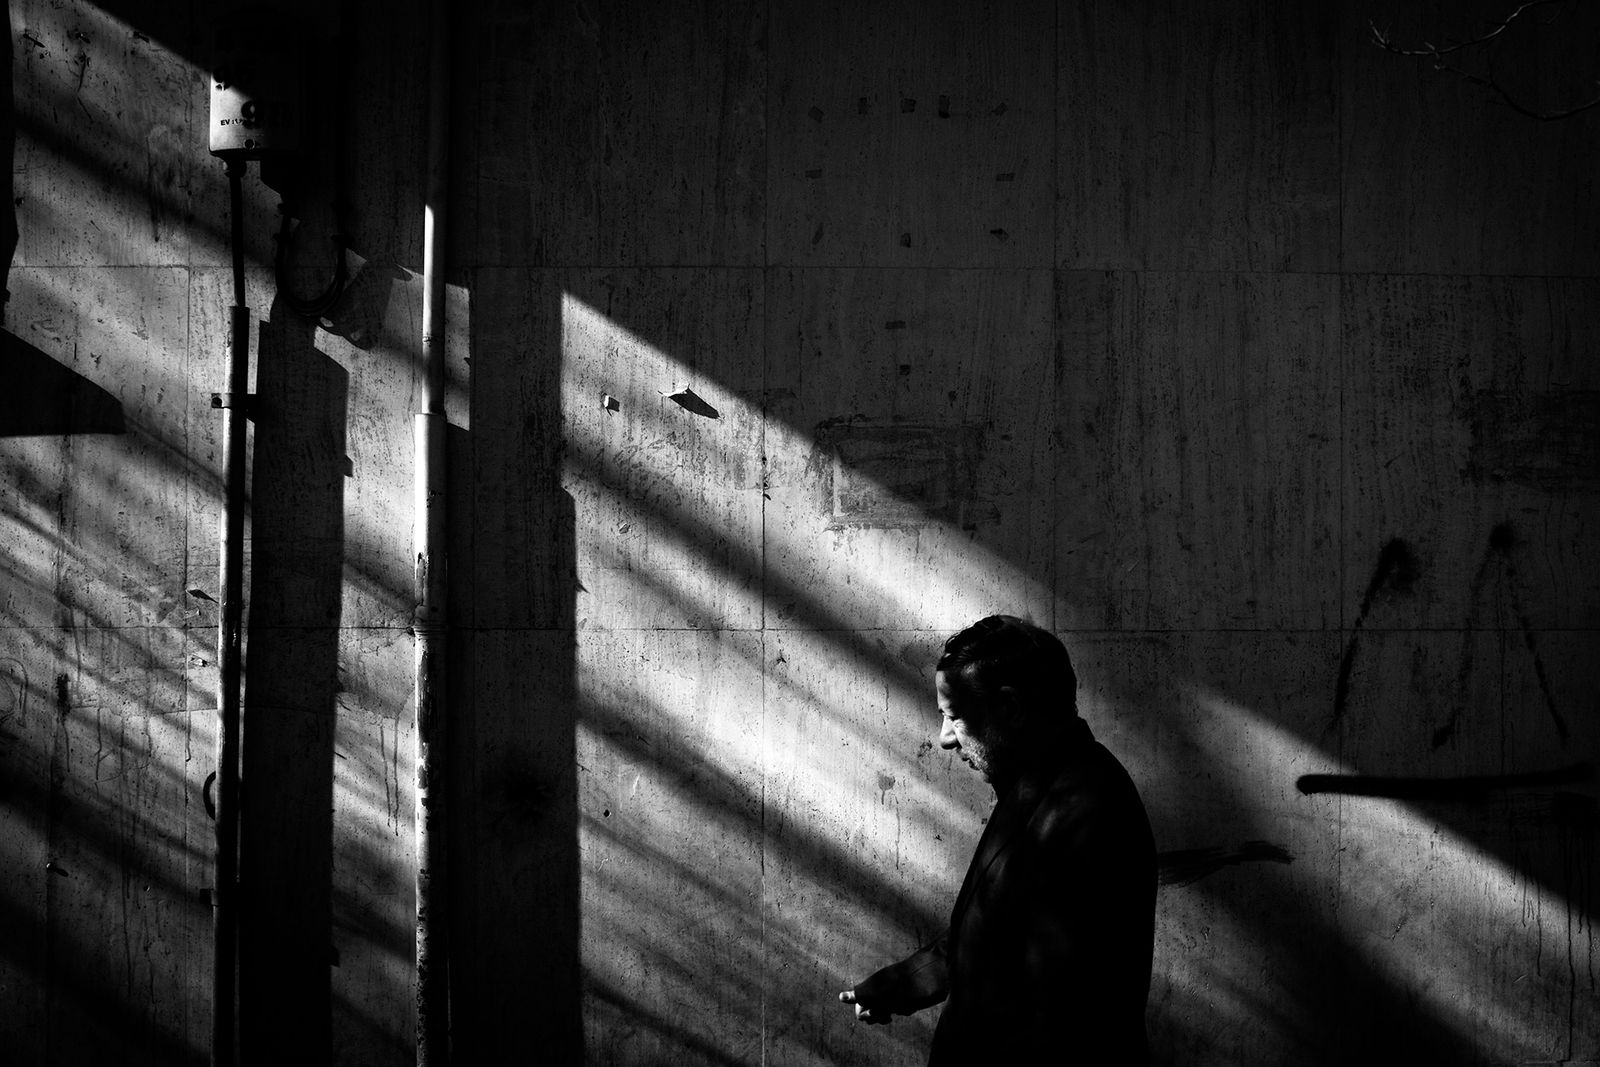 © Foad Ashtari - Image from the Lights and Shades of my city photography project